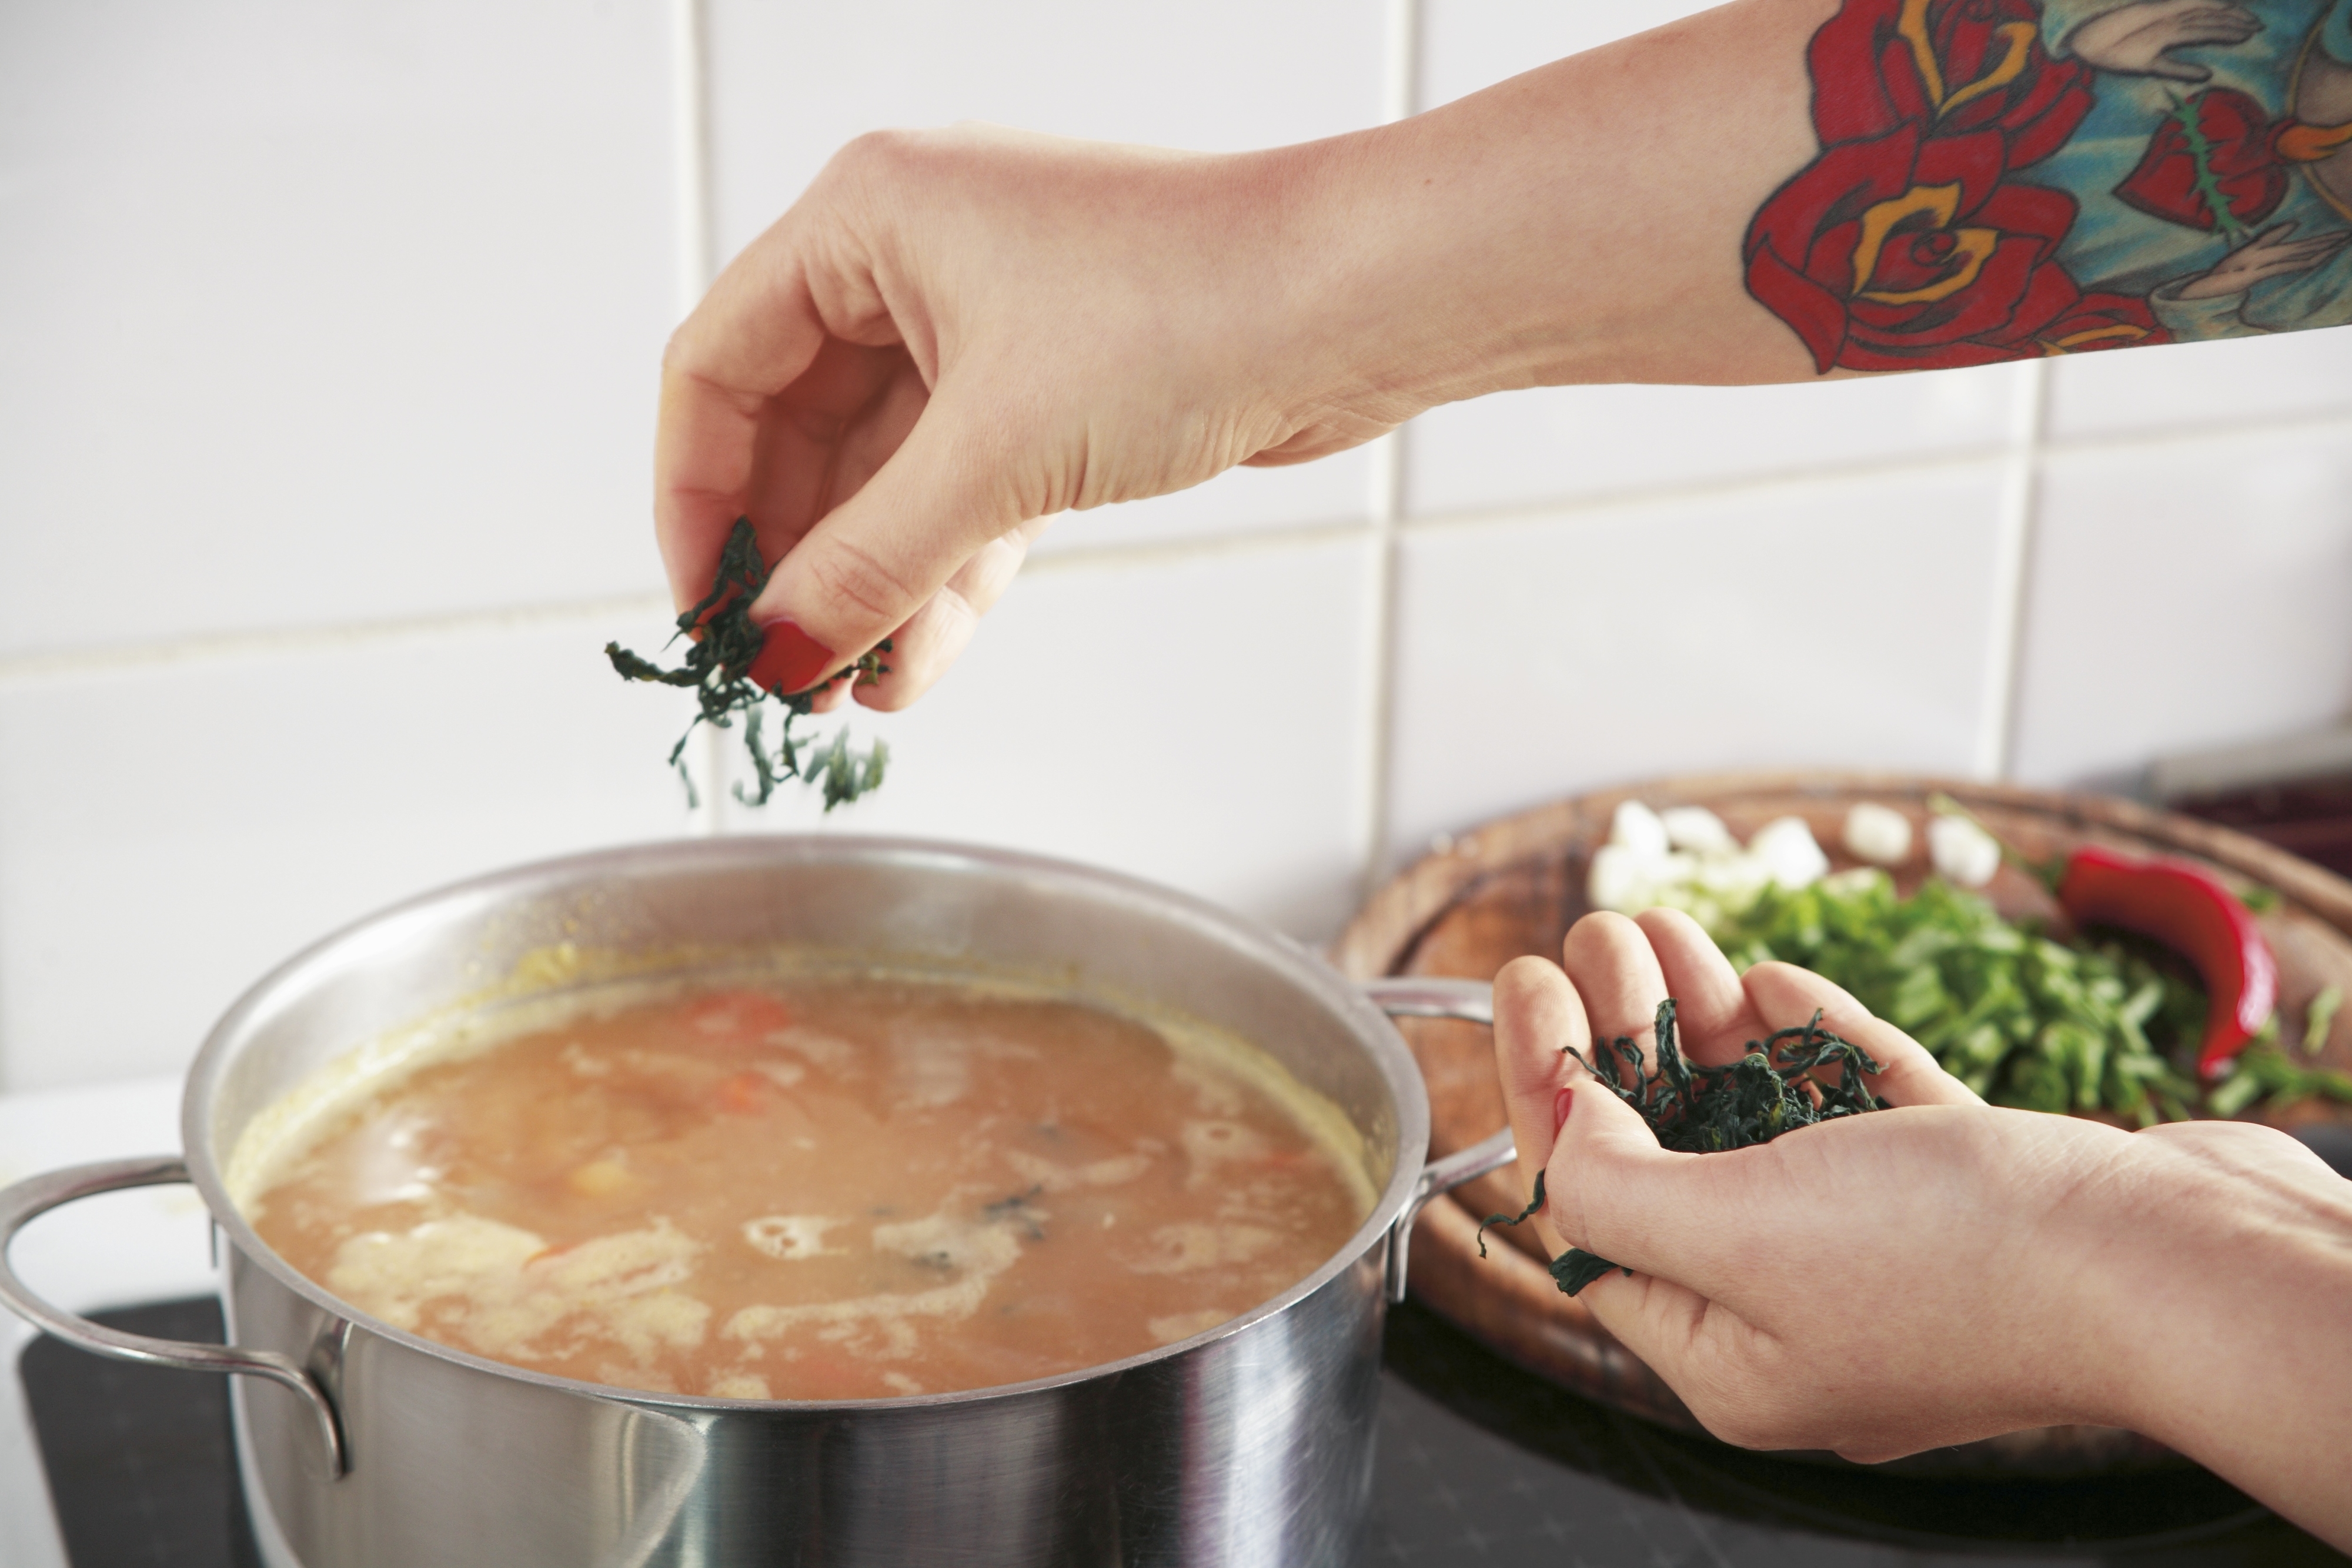 woman adding herbs to a pot of soup